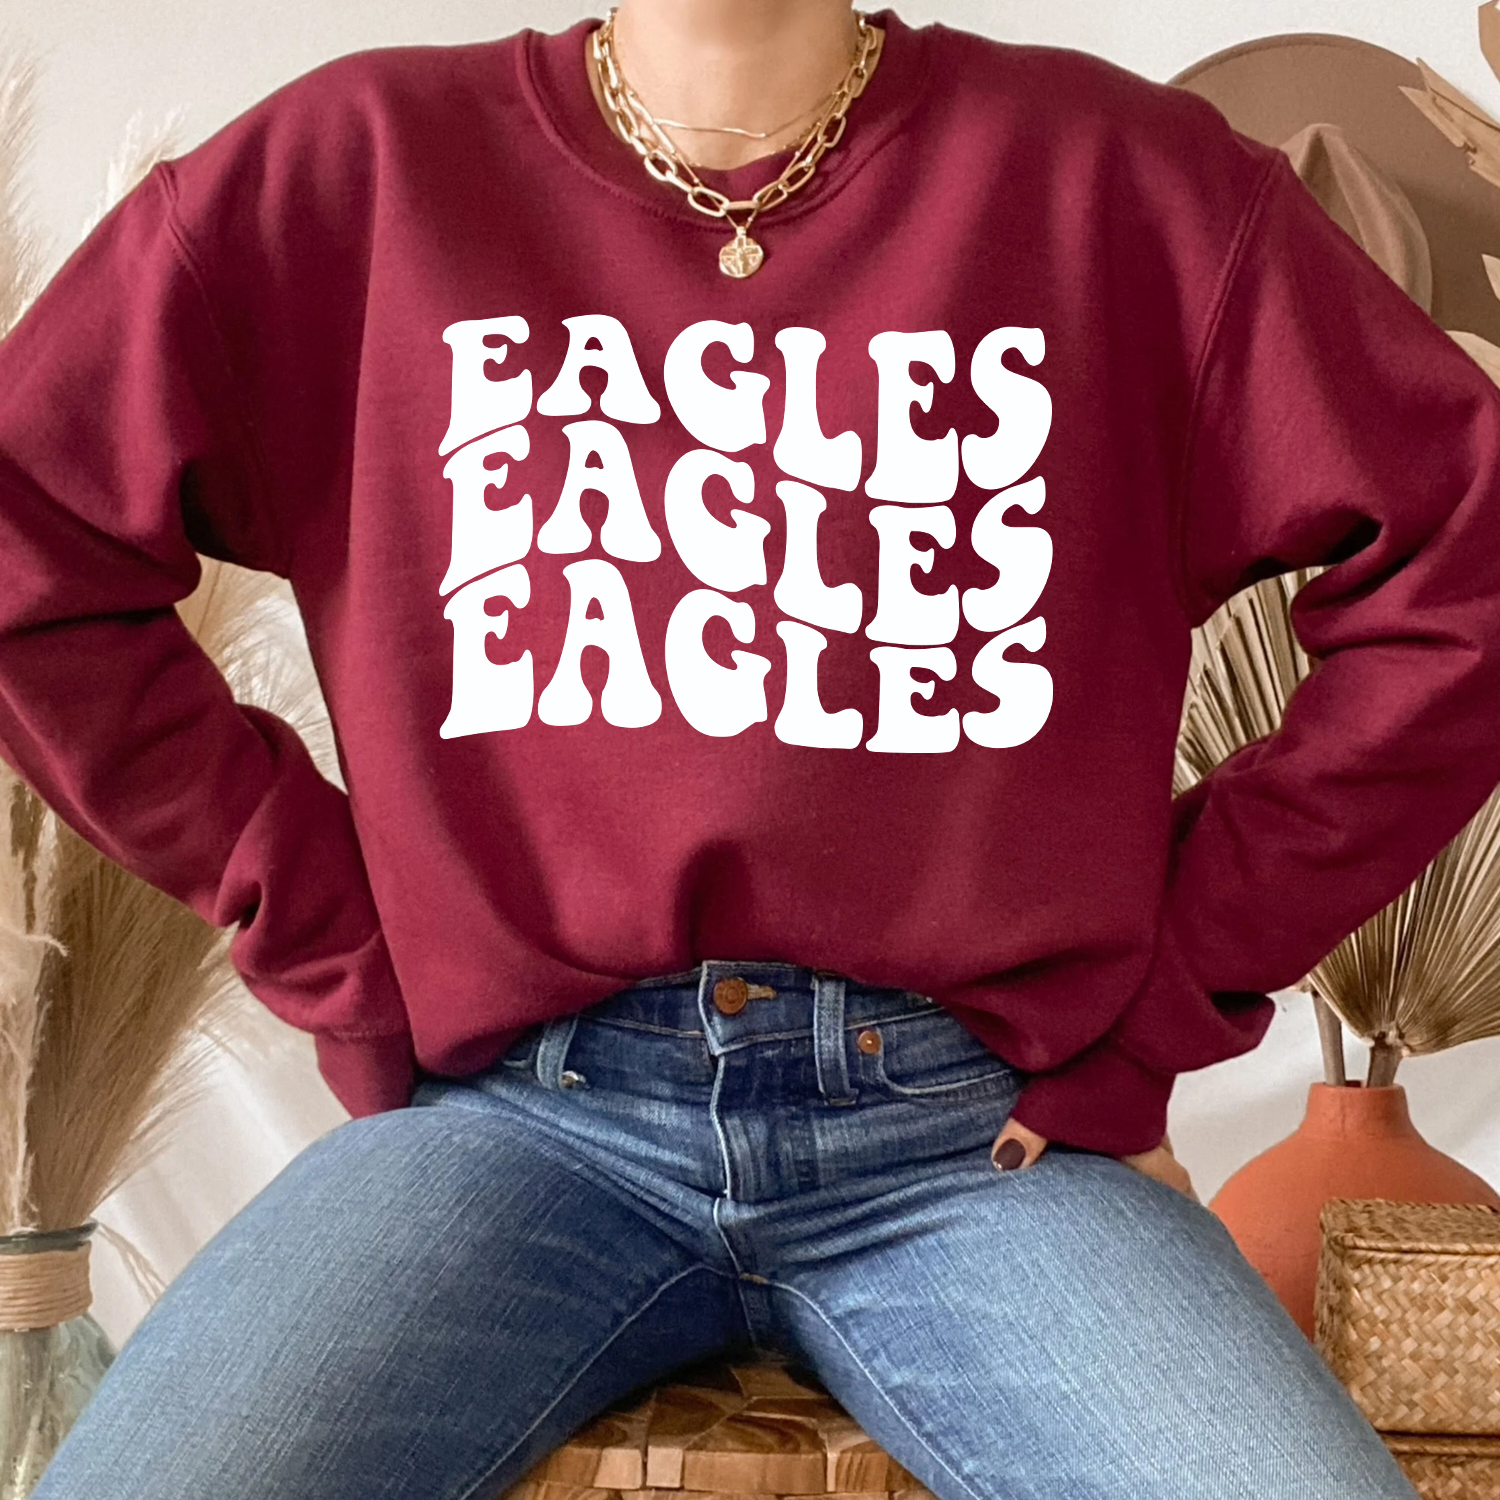 Women's Eagles Shirt, Gifts For Eagles Fans - Happy Place for